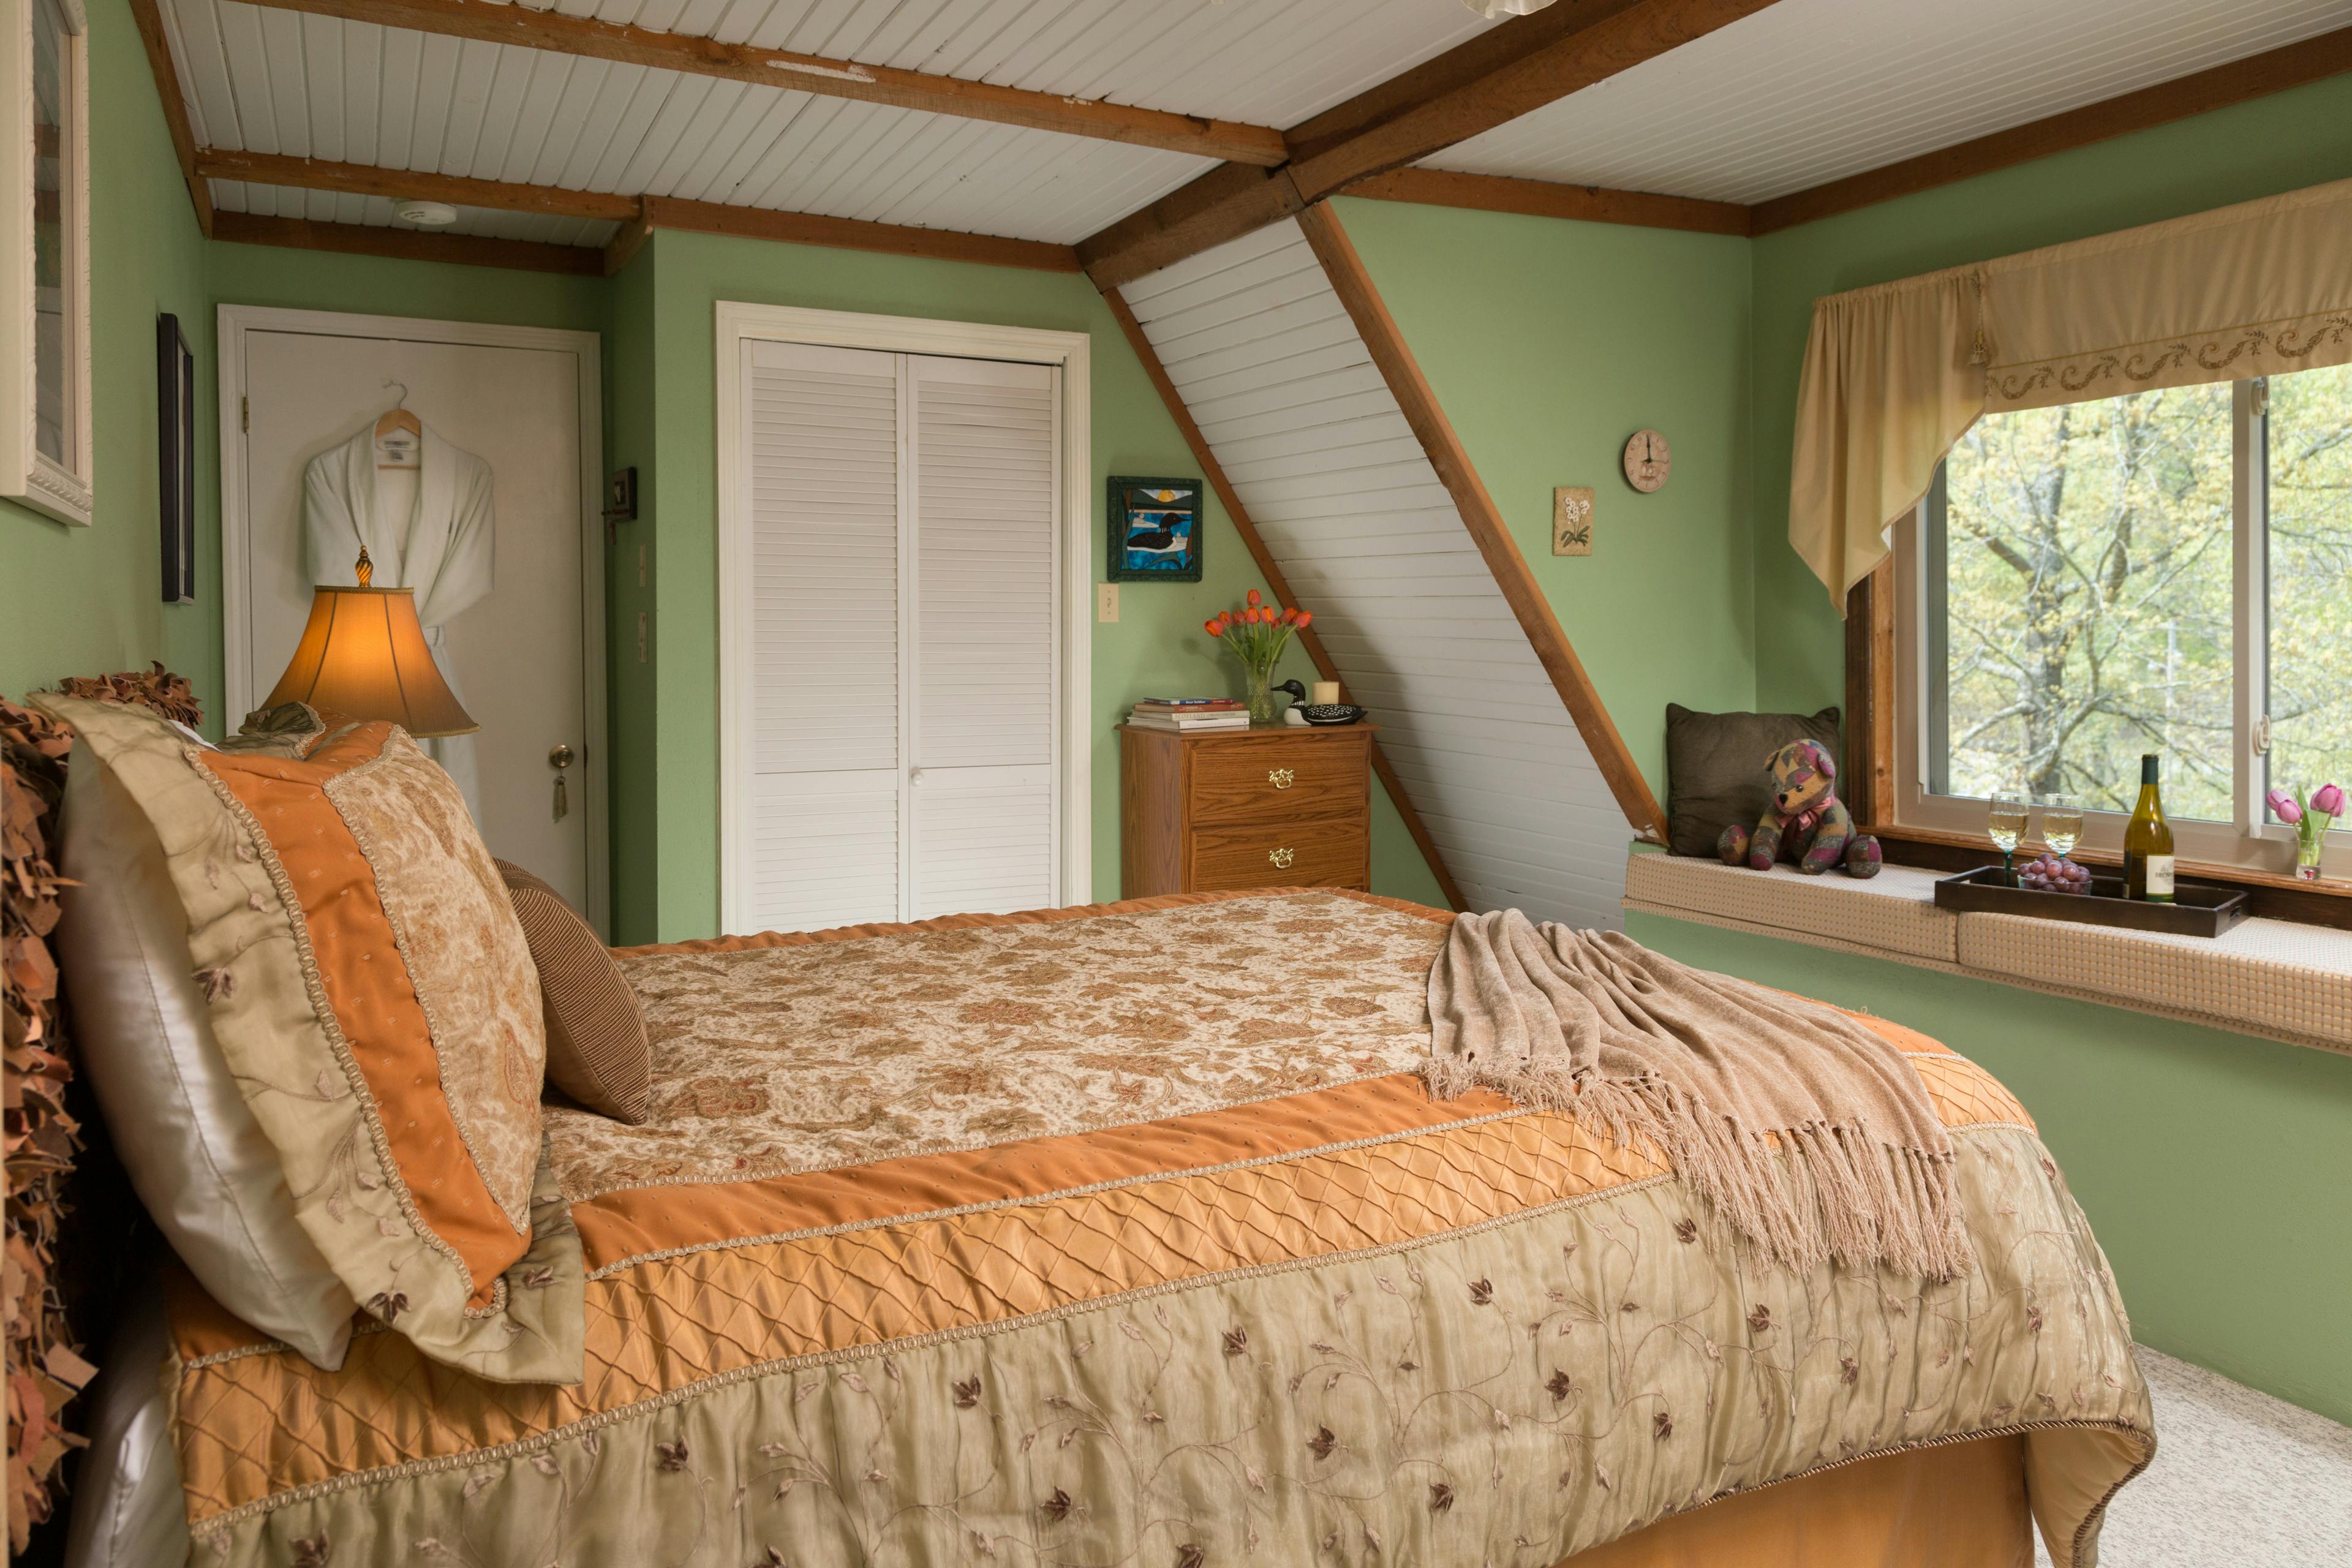 A bedroom with a queen sized bed with rust colored quilt and decorative pillows.  Behind the bed is a white door with a white robe hanging on it.  To the right of that door is a white closet door, and a wooden dresser with books and a vase of flowers on top.  The bed is facing a window seat with cushions and a tray with a bottle of wine and wine glasses, and a decorative pillow.  The window seat is in front of a large window overlooking trees.  The bedroom walls are white and green.  There is carpet on the floor.